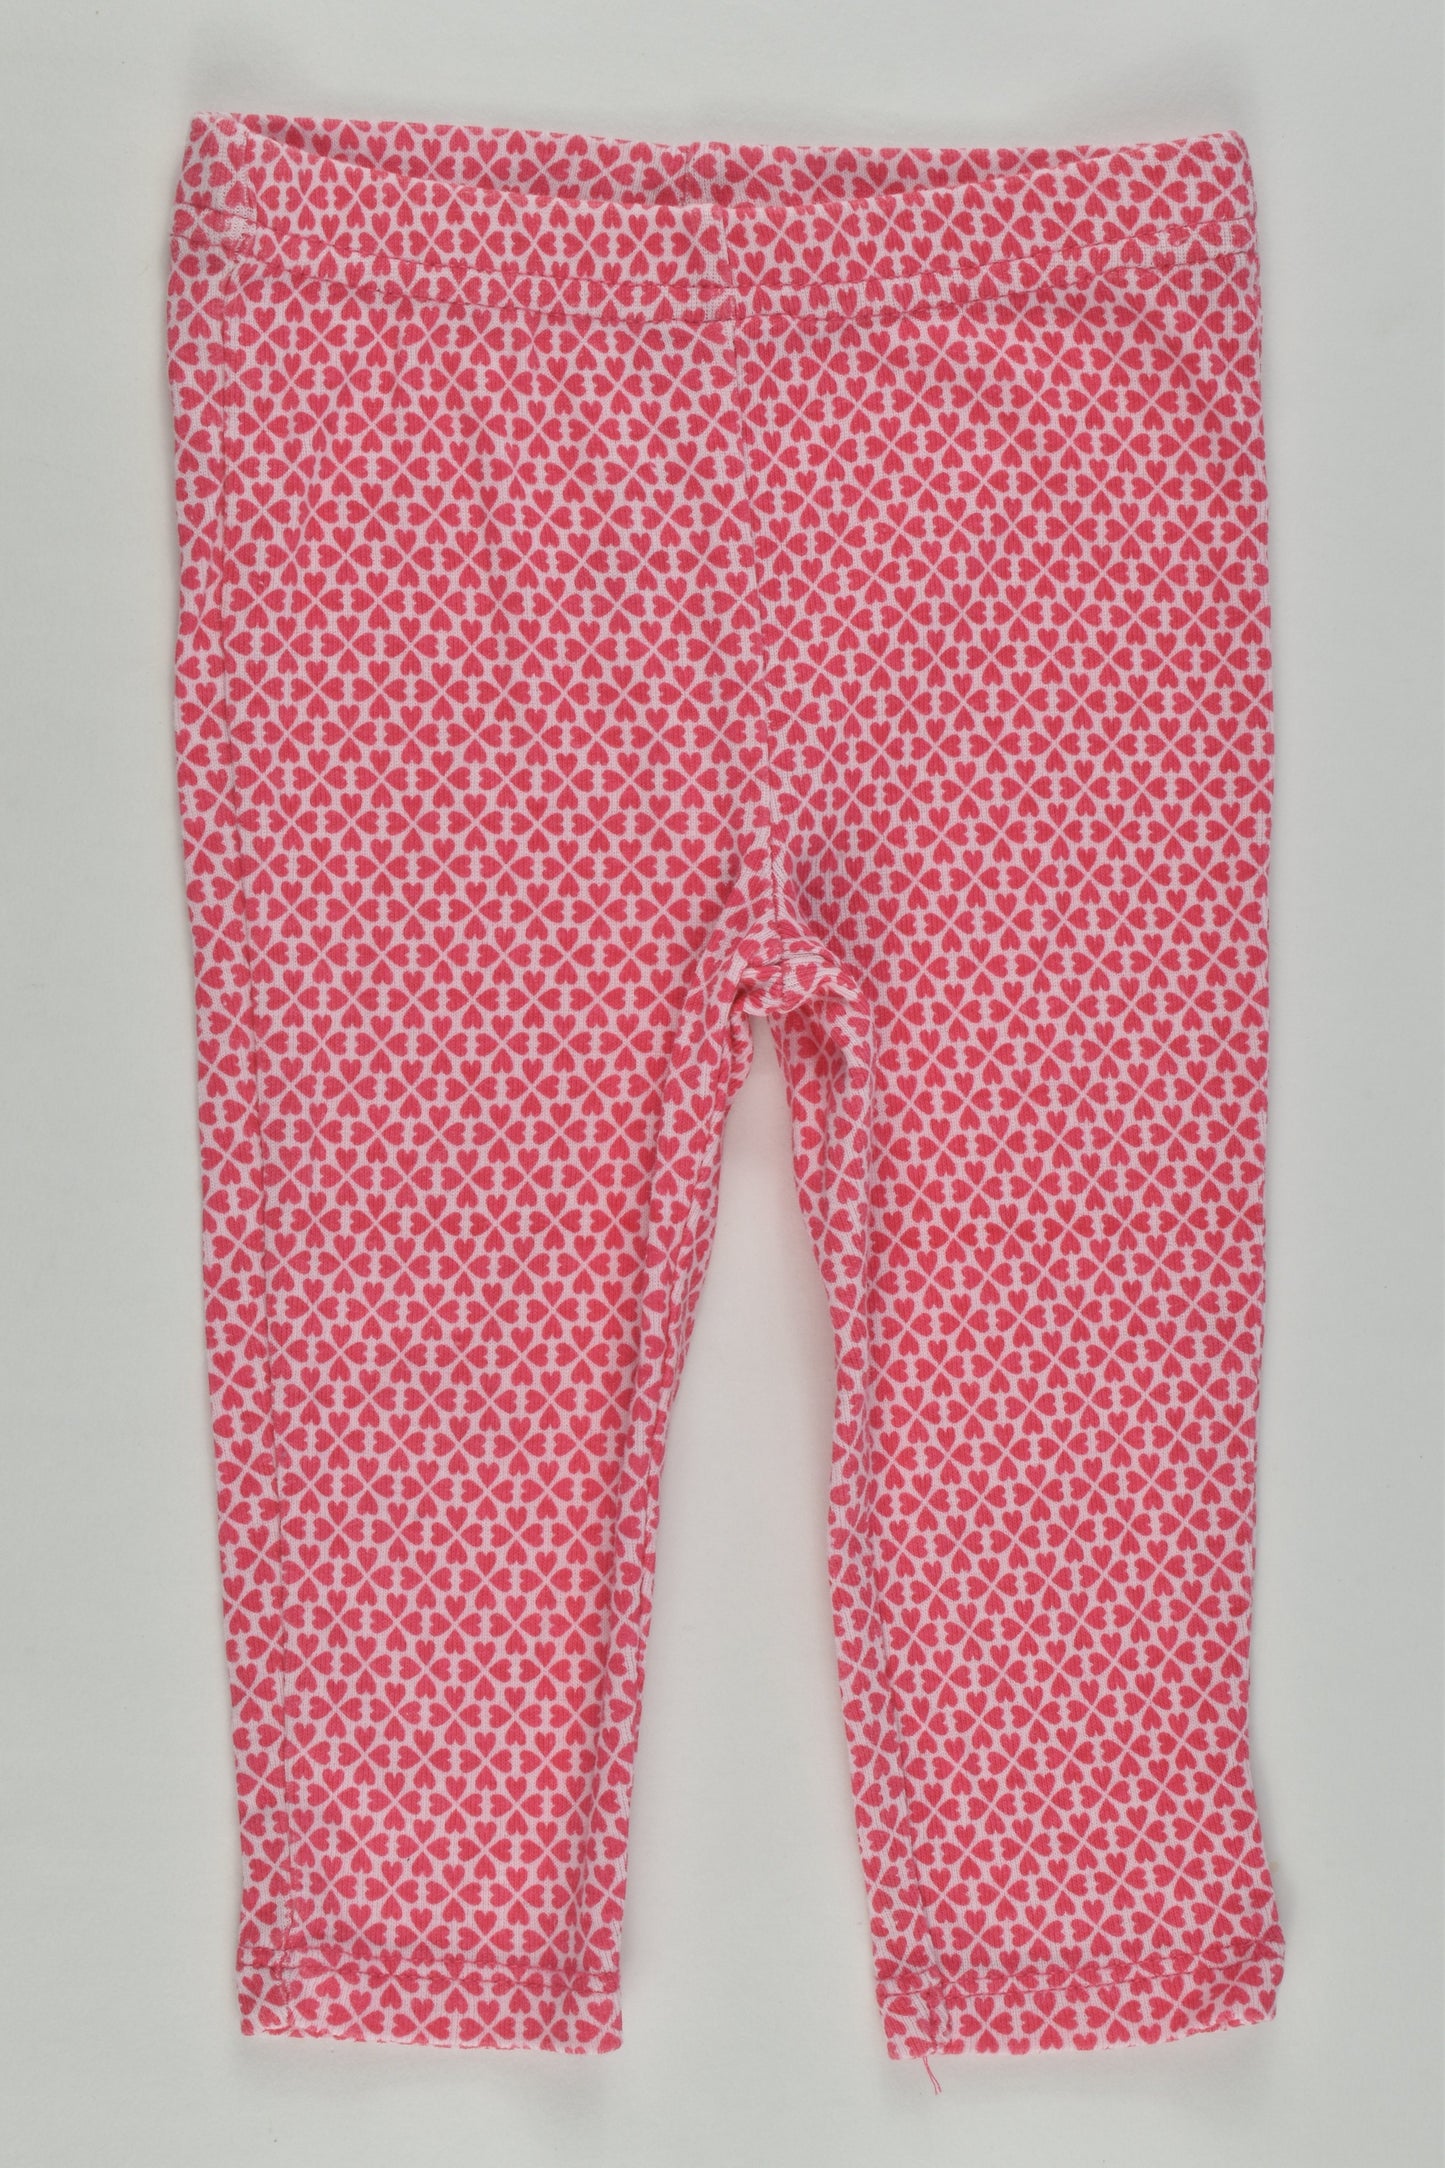 Child Of Mine by Carter's Size 00 (3-6 months) Leggings